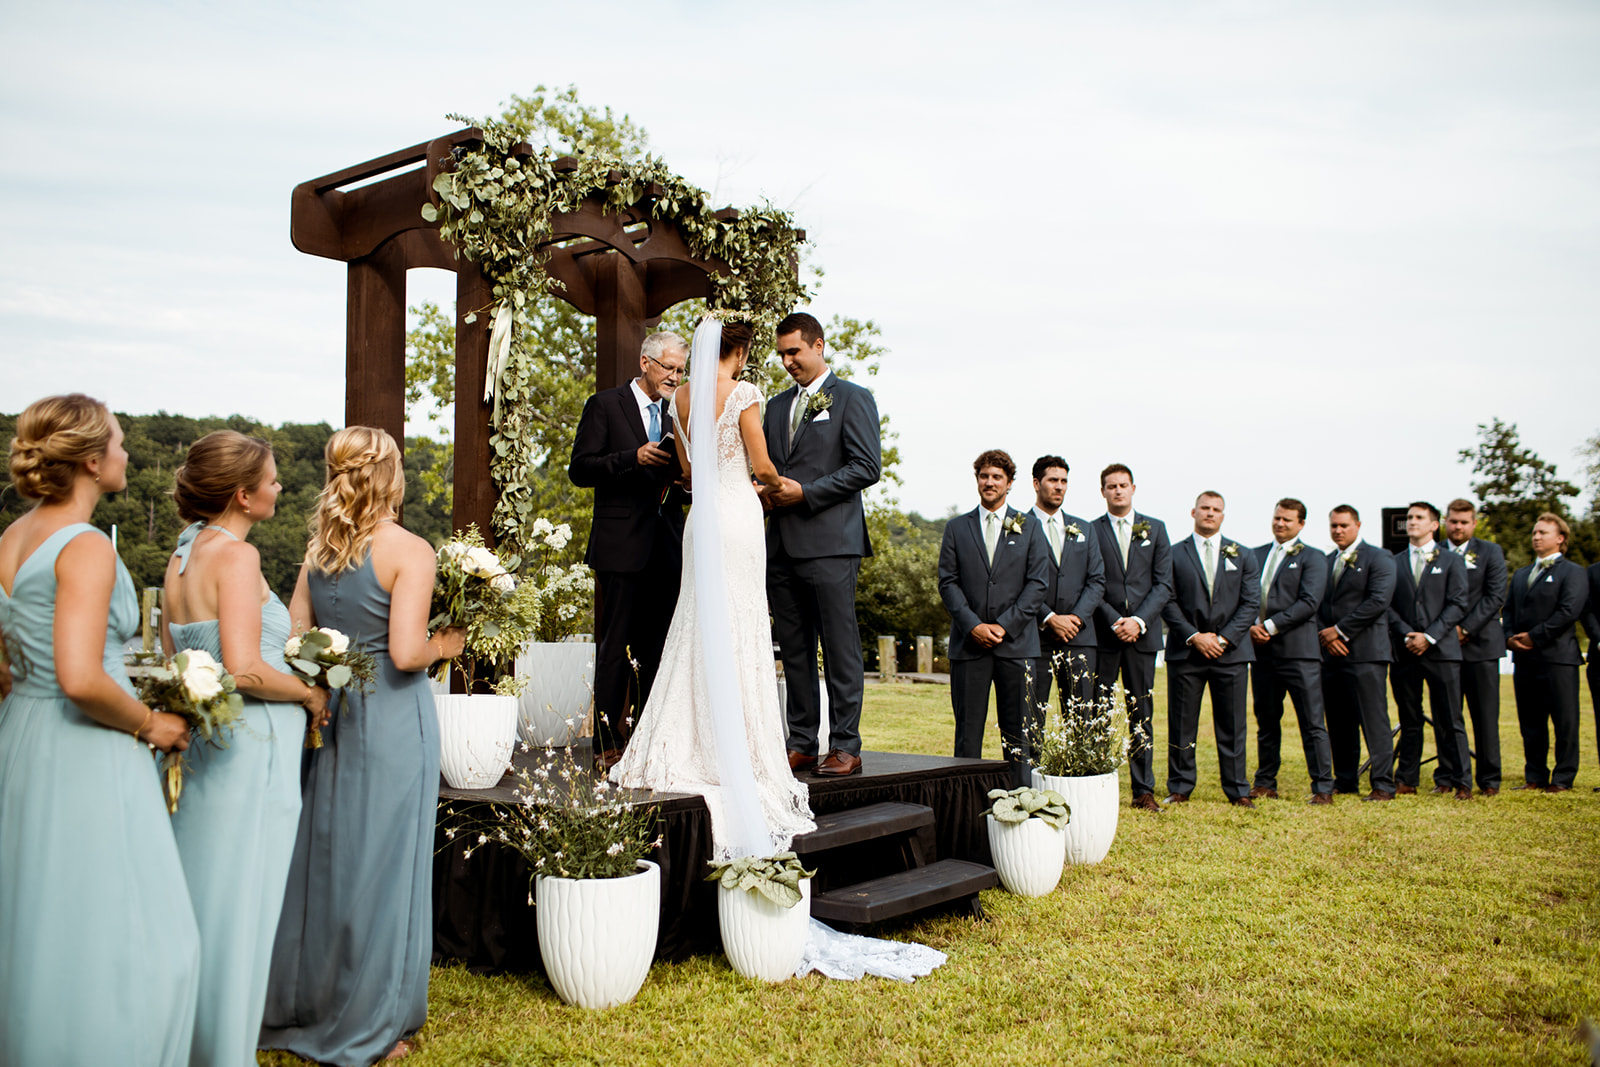 Sommar & Ben's wedding by the water in Connecticut. Wooden wedding arch way and white potted plants for the ceremony decor. - Pearl Weddings & Events